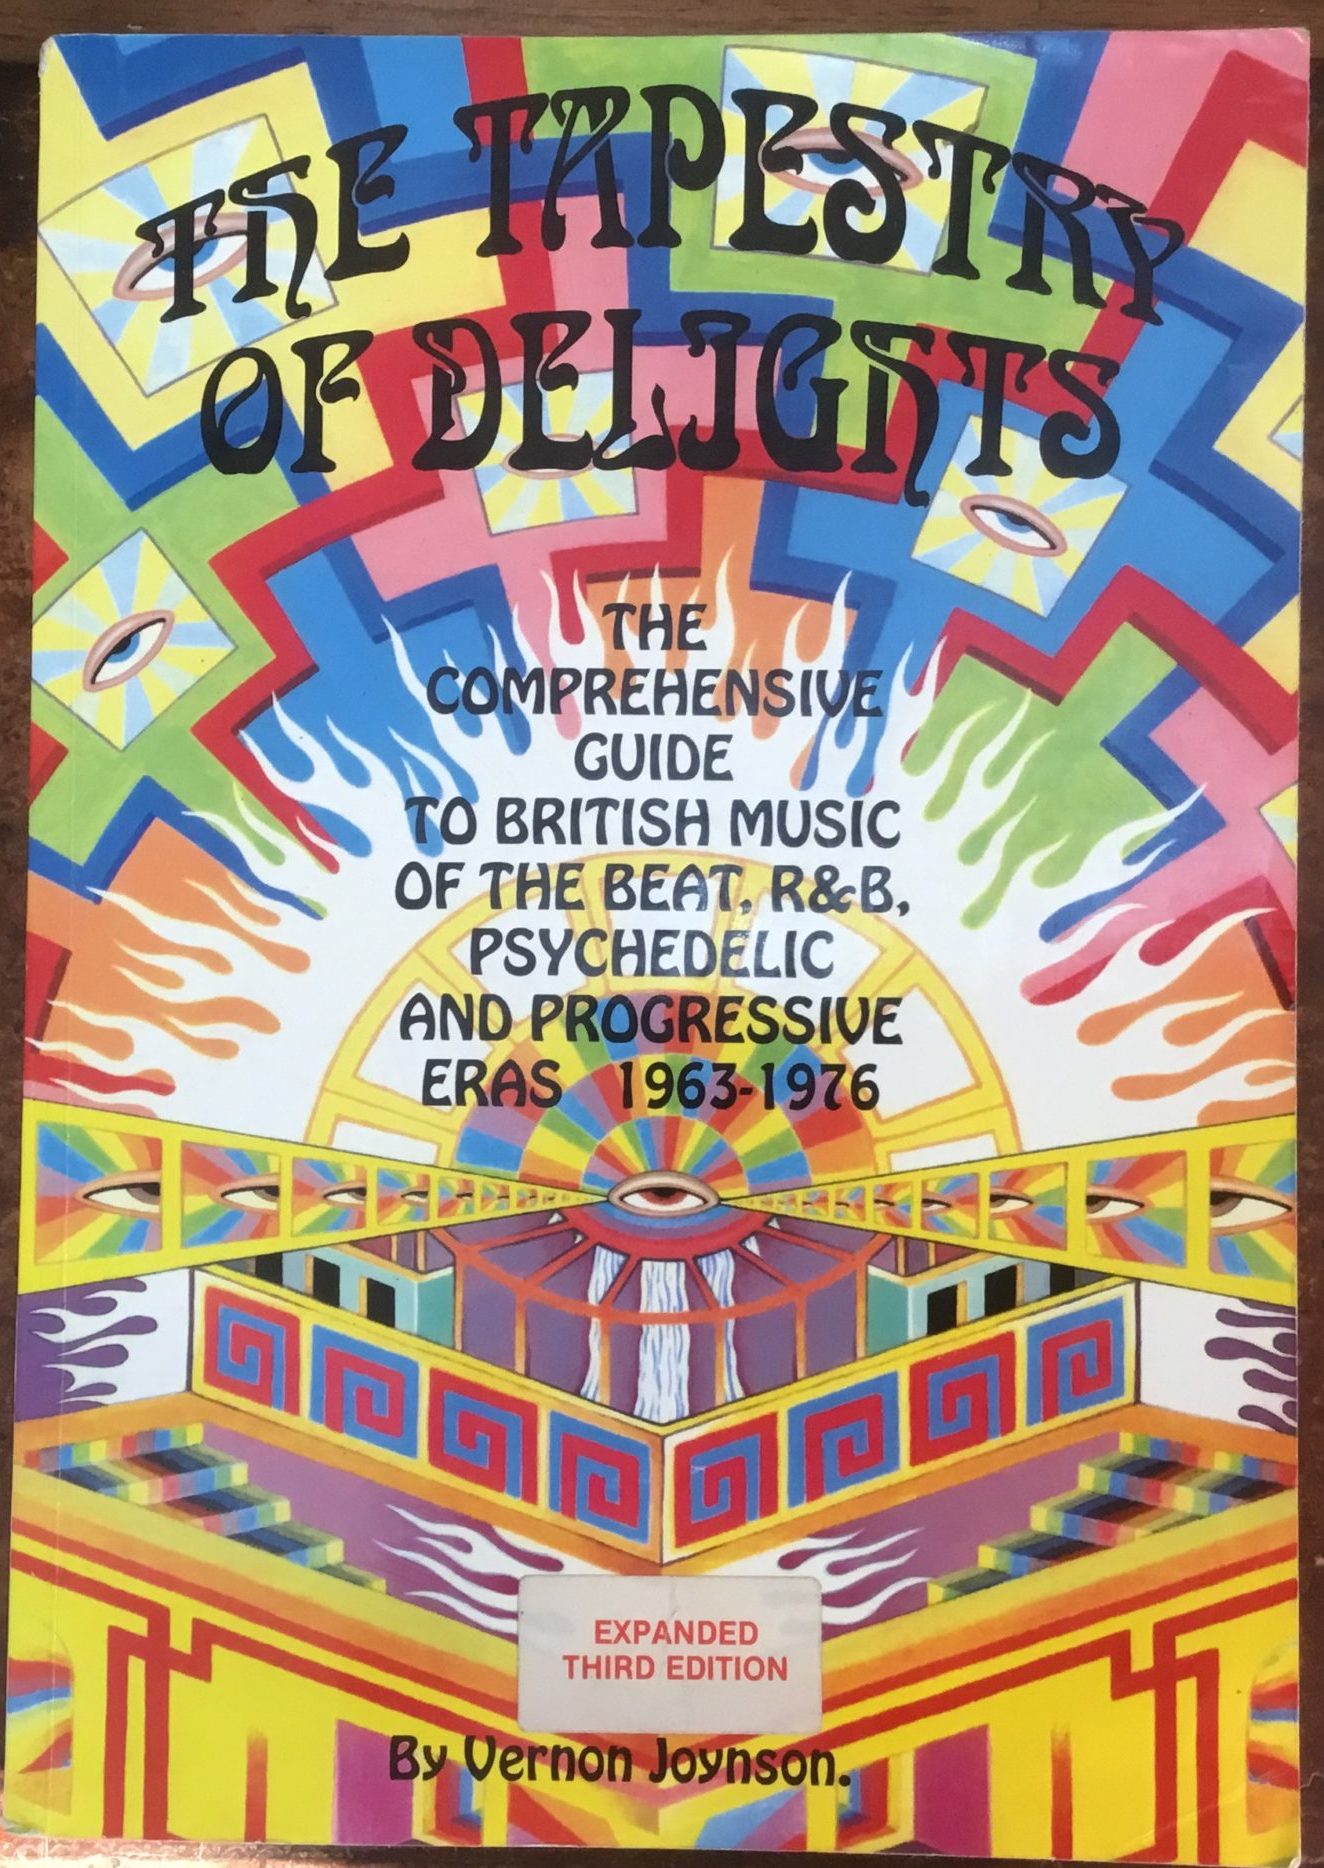 Tapestry of Delights. June 1998 Update. The Comprehensive Guide to British Music of the Beat, R&B, Psychedelic and Progressive Eras 1963-1976